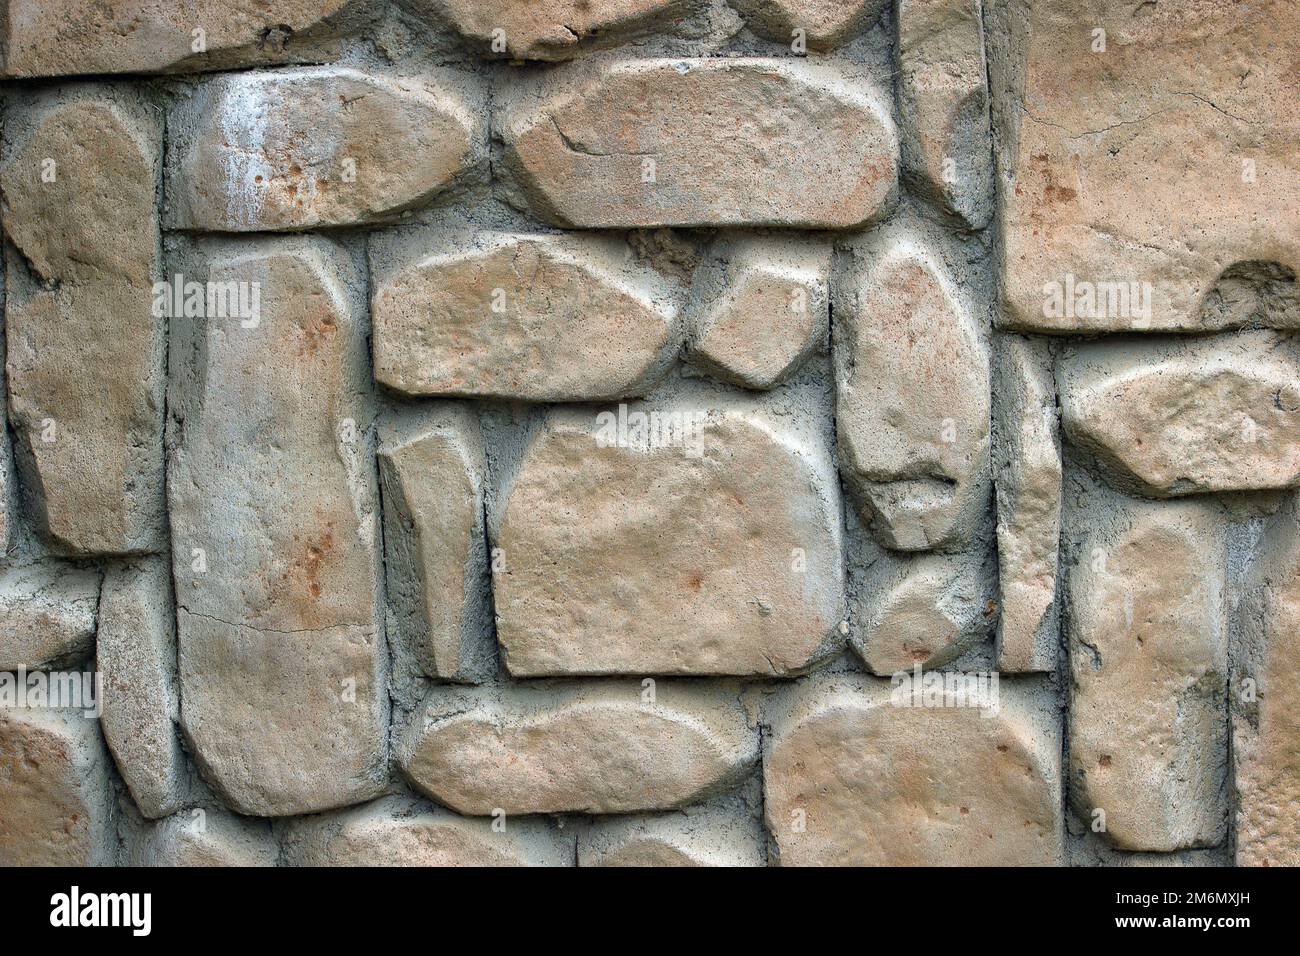 Light brown stones of varying sizes built into a wall, can be used as background Stock Photo